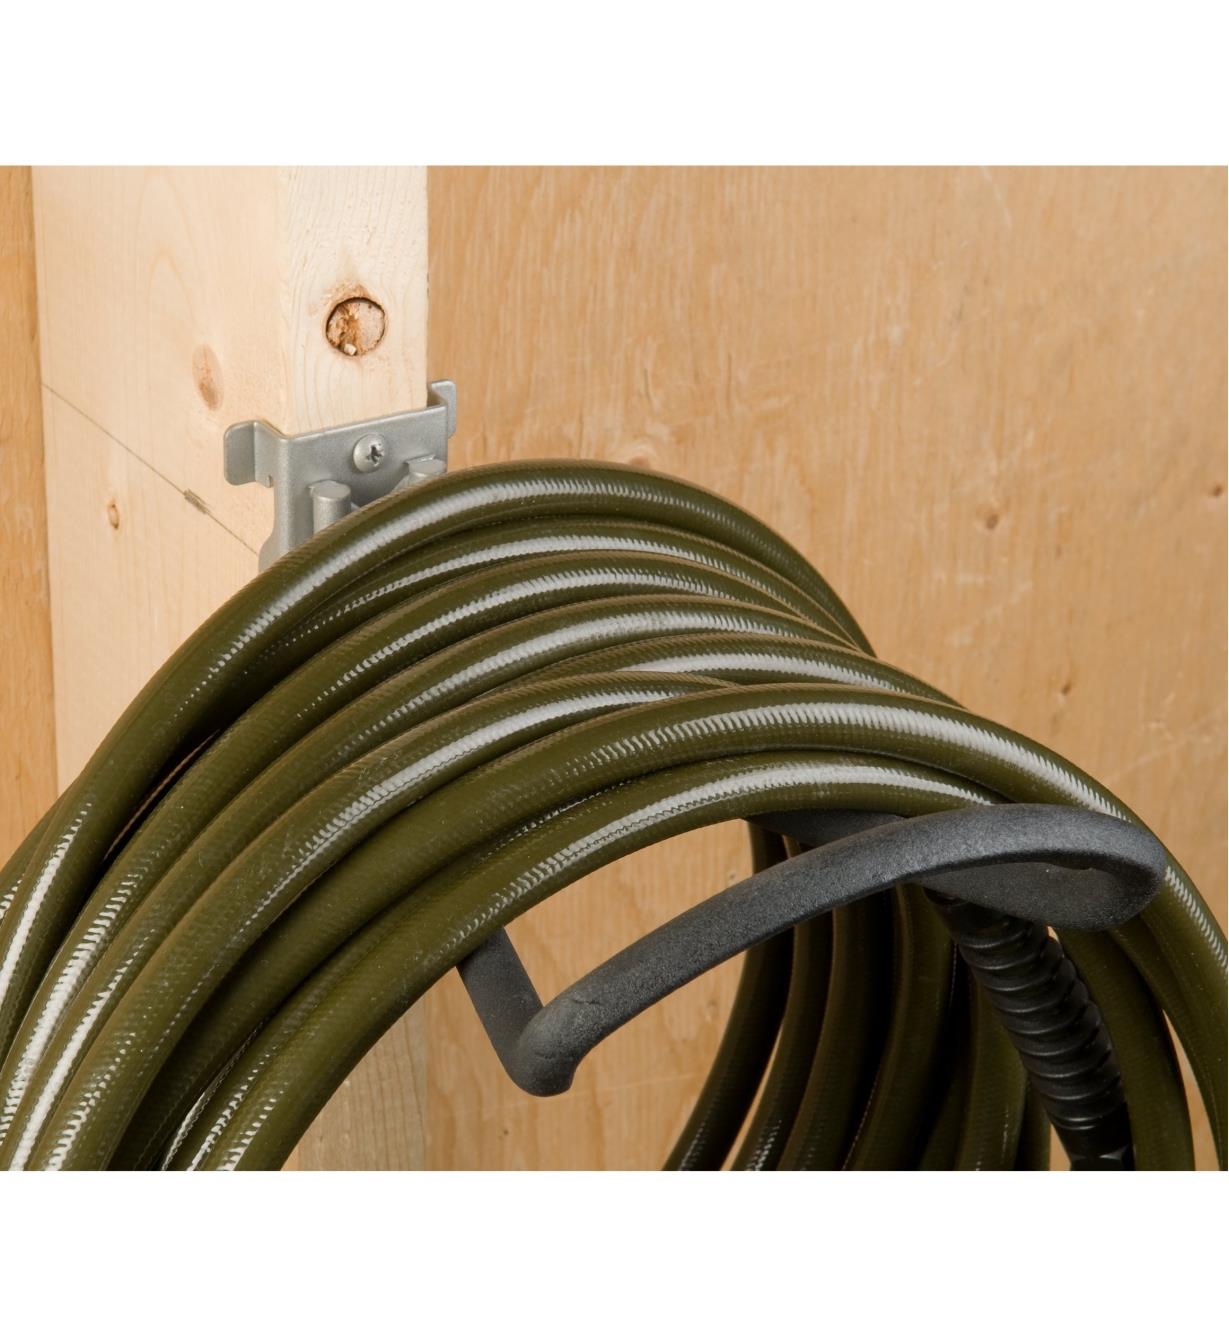 Loop Hook affixed to a stud, holding a hose